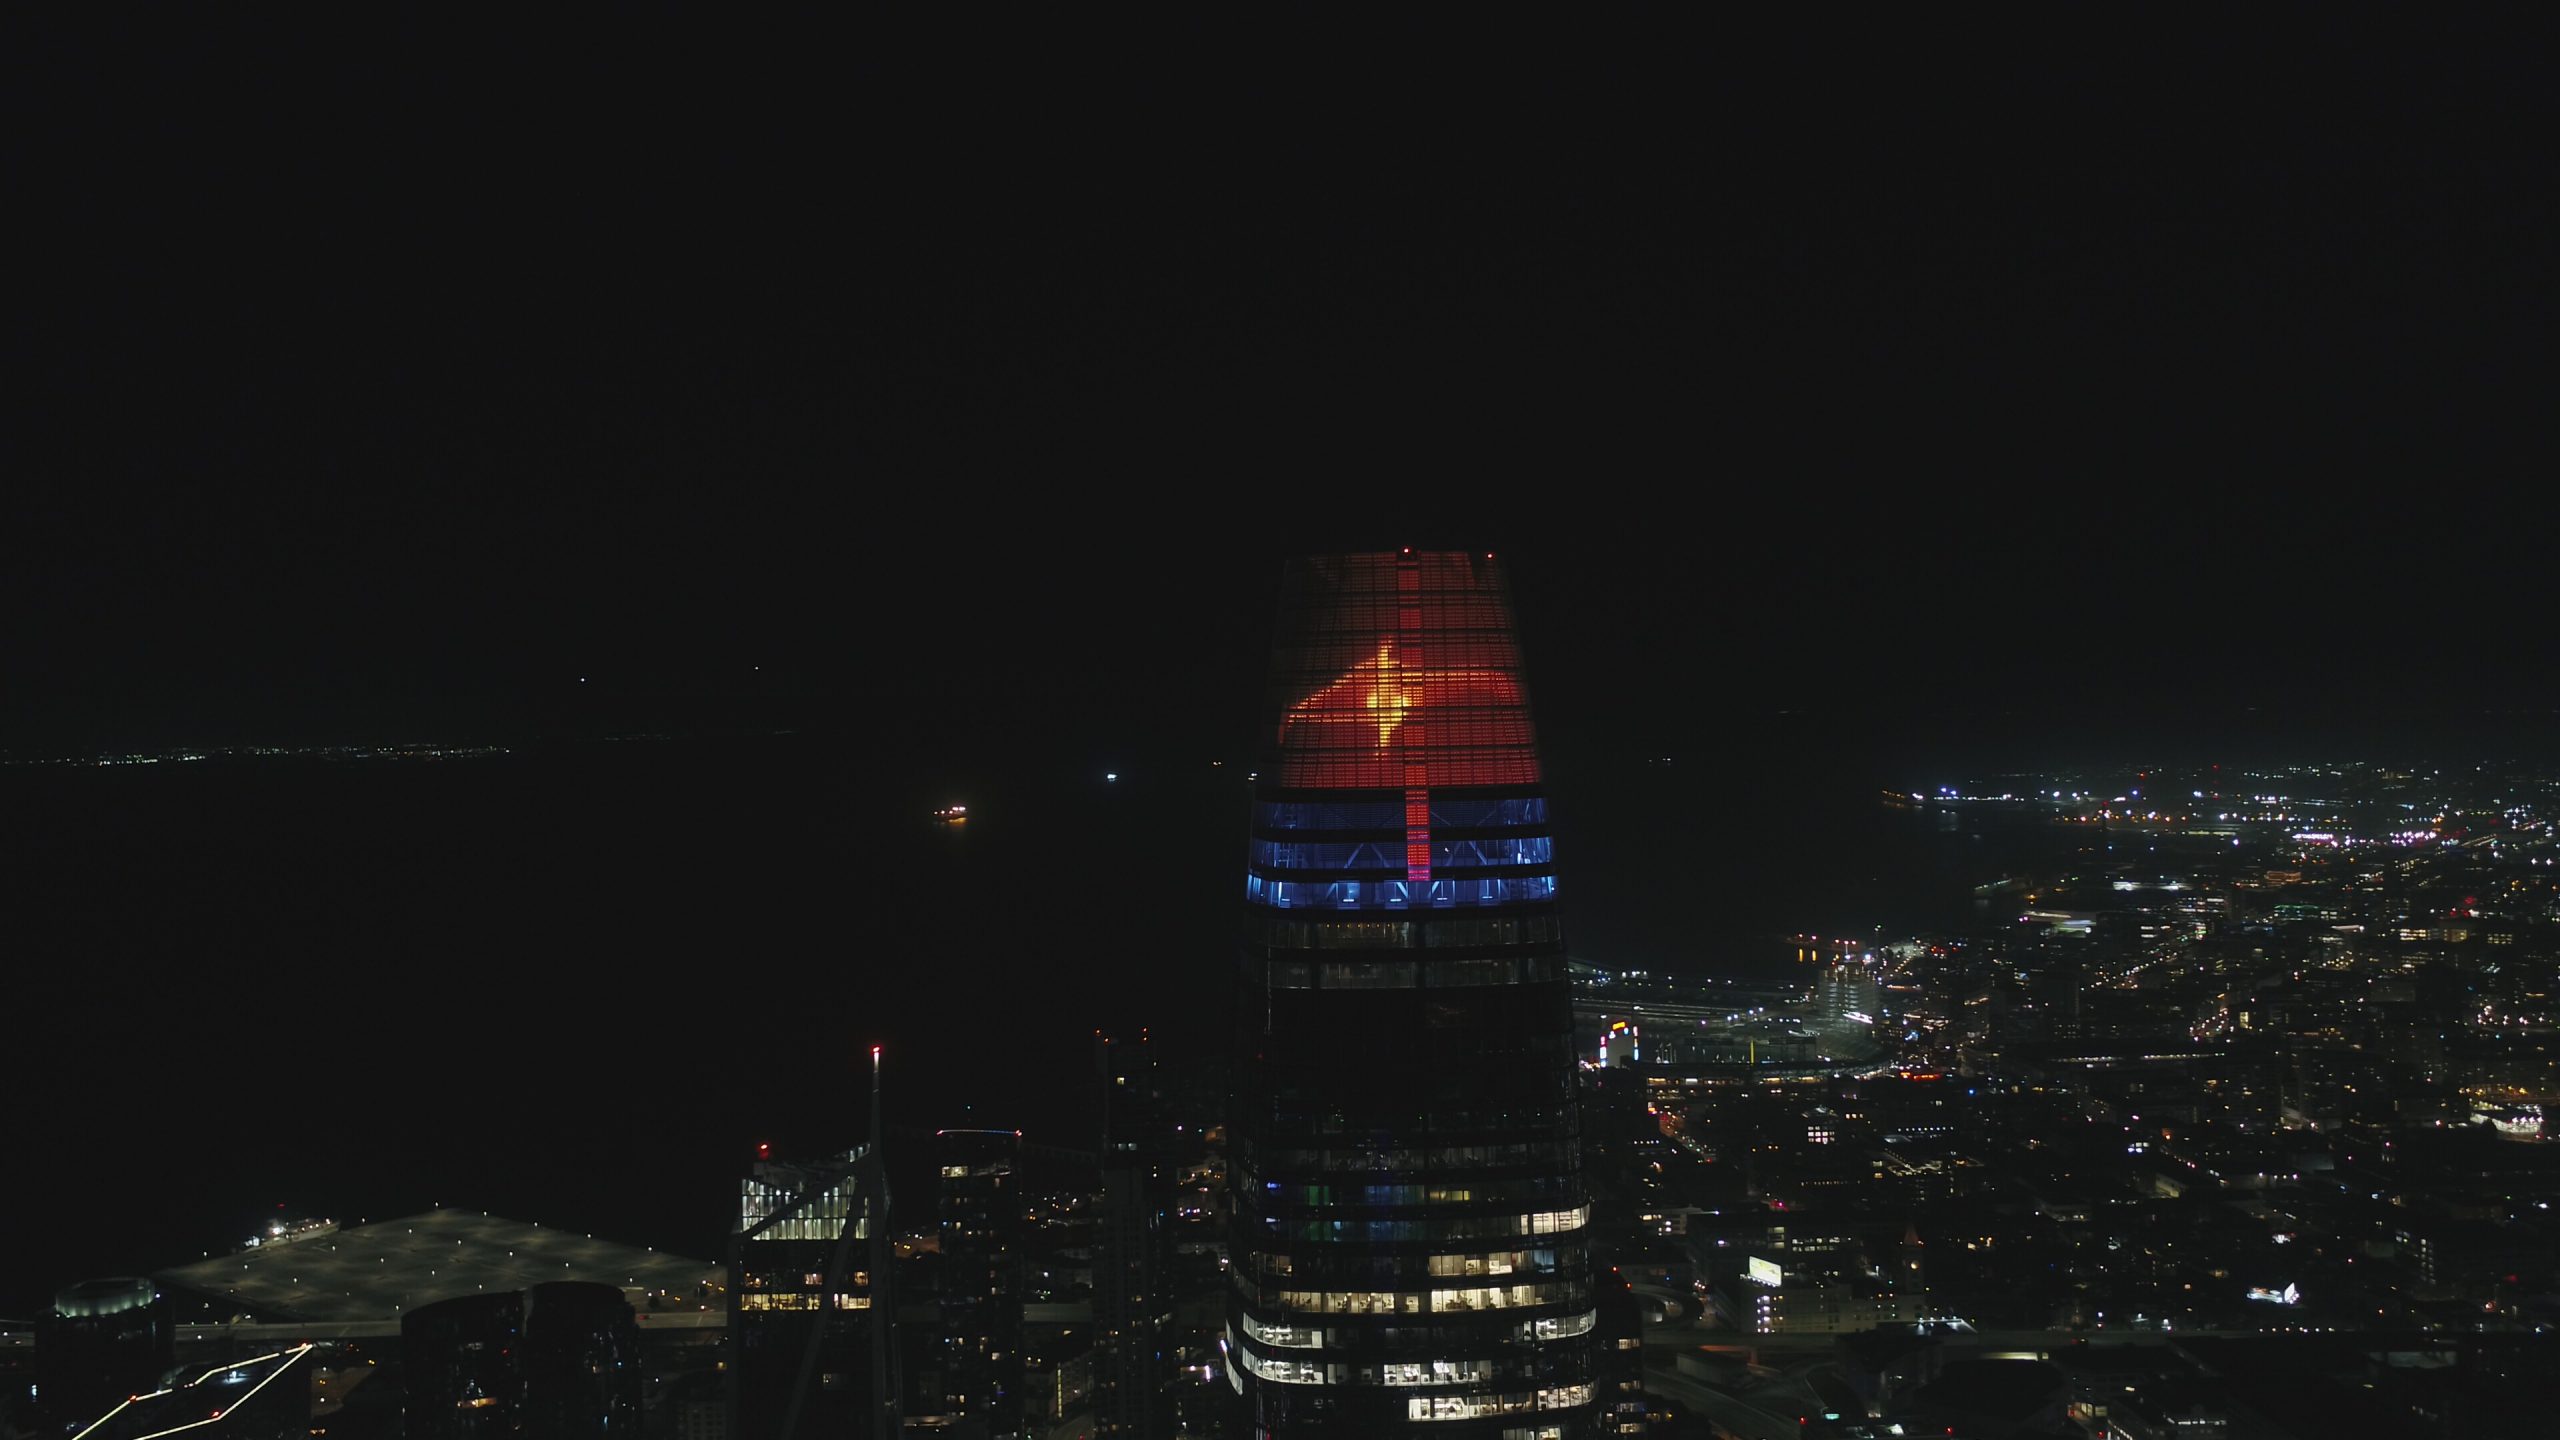 Lightdoves fly the sky canvas of the Salesforce Tower San Francisco,